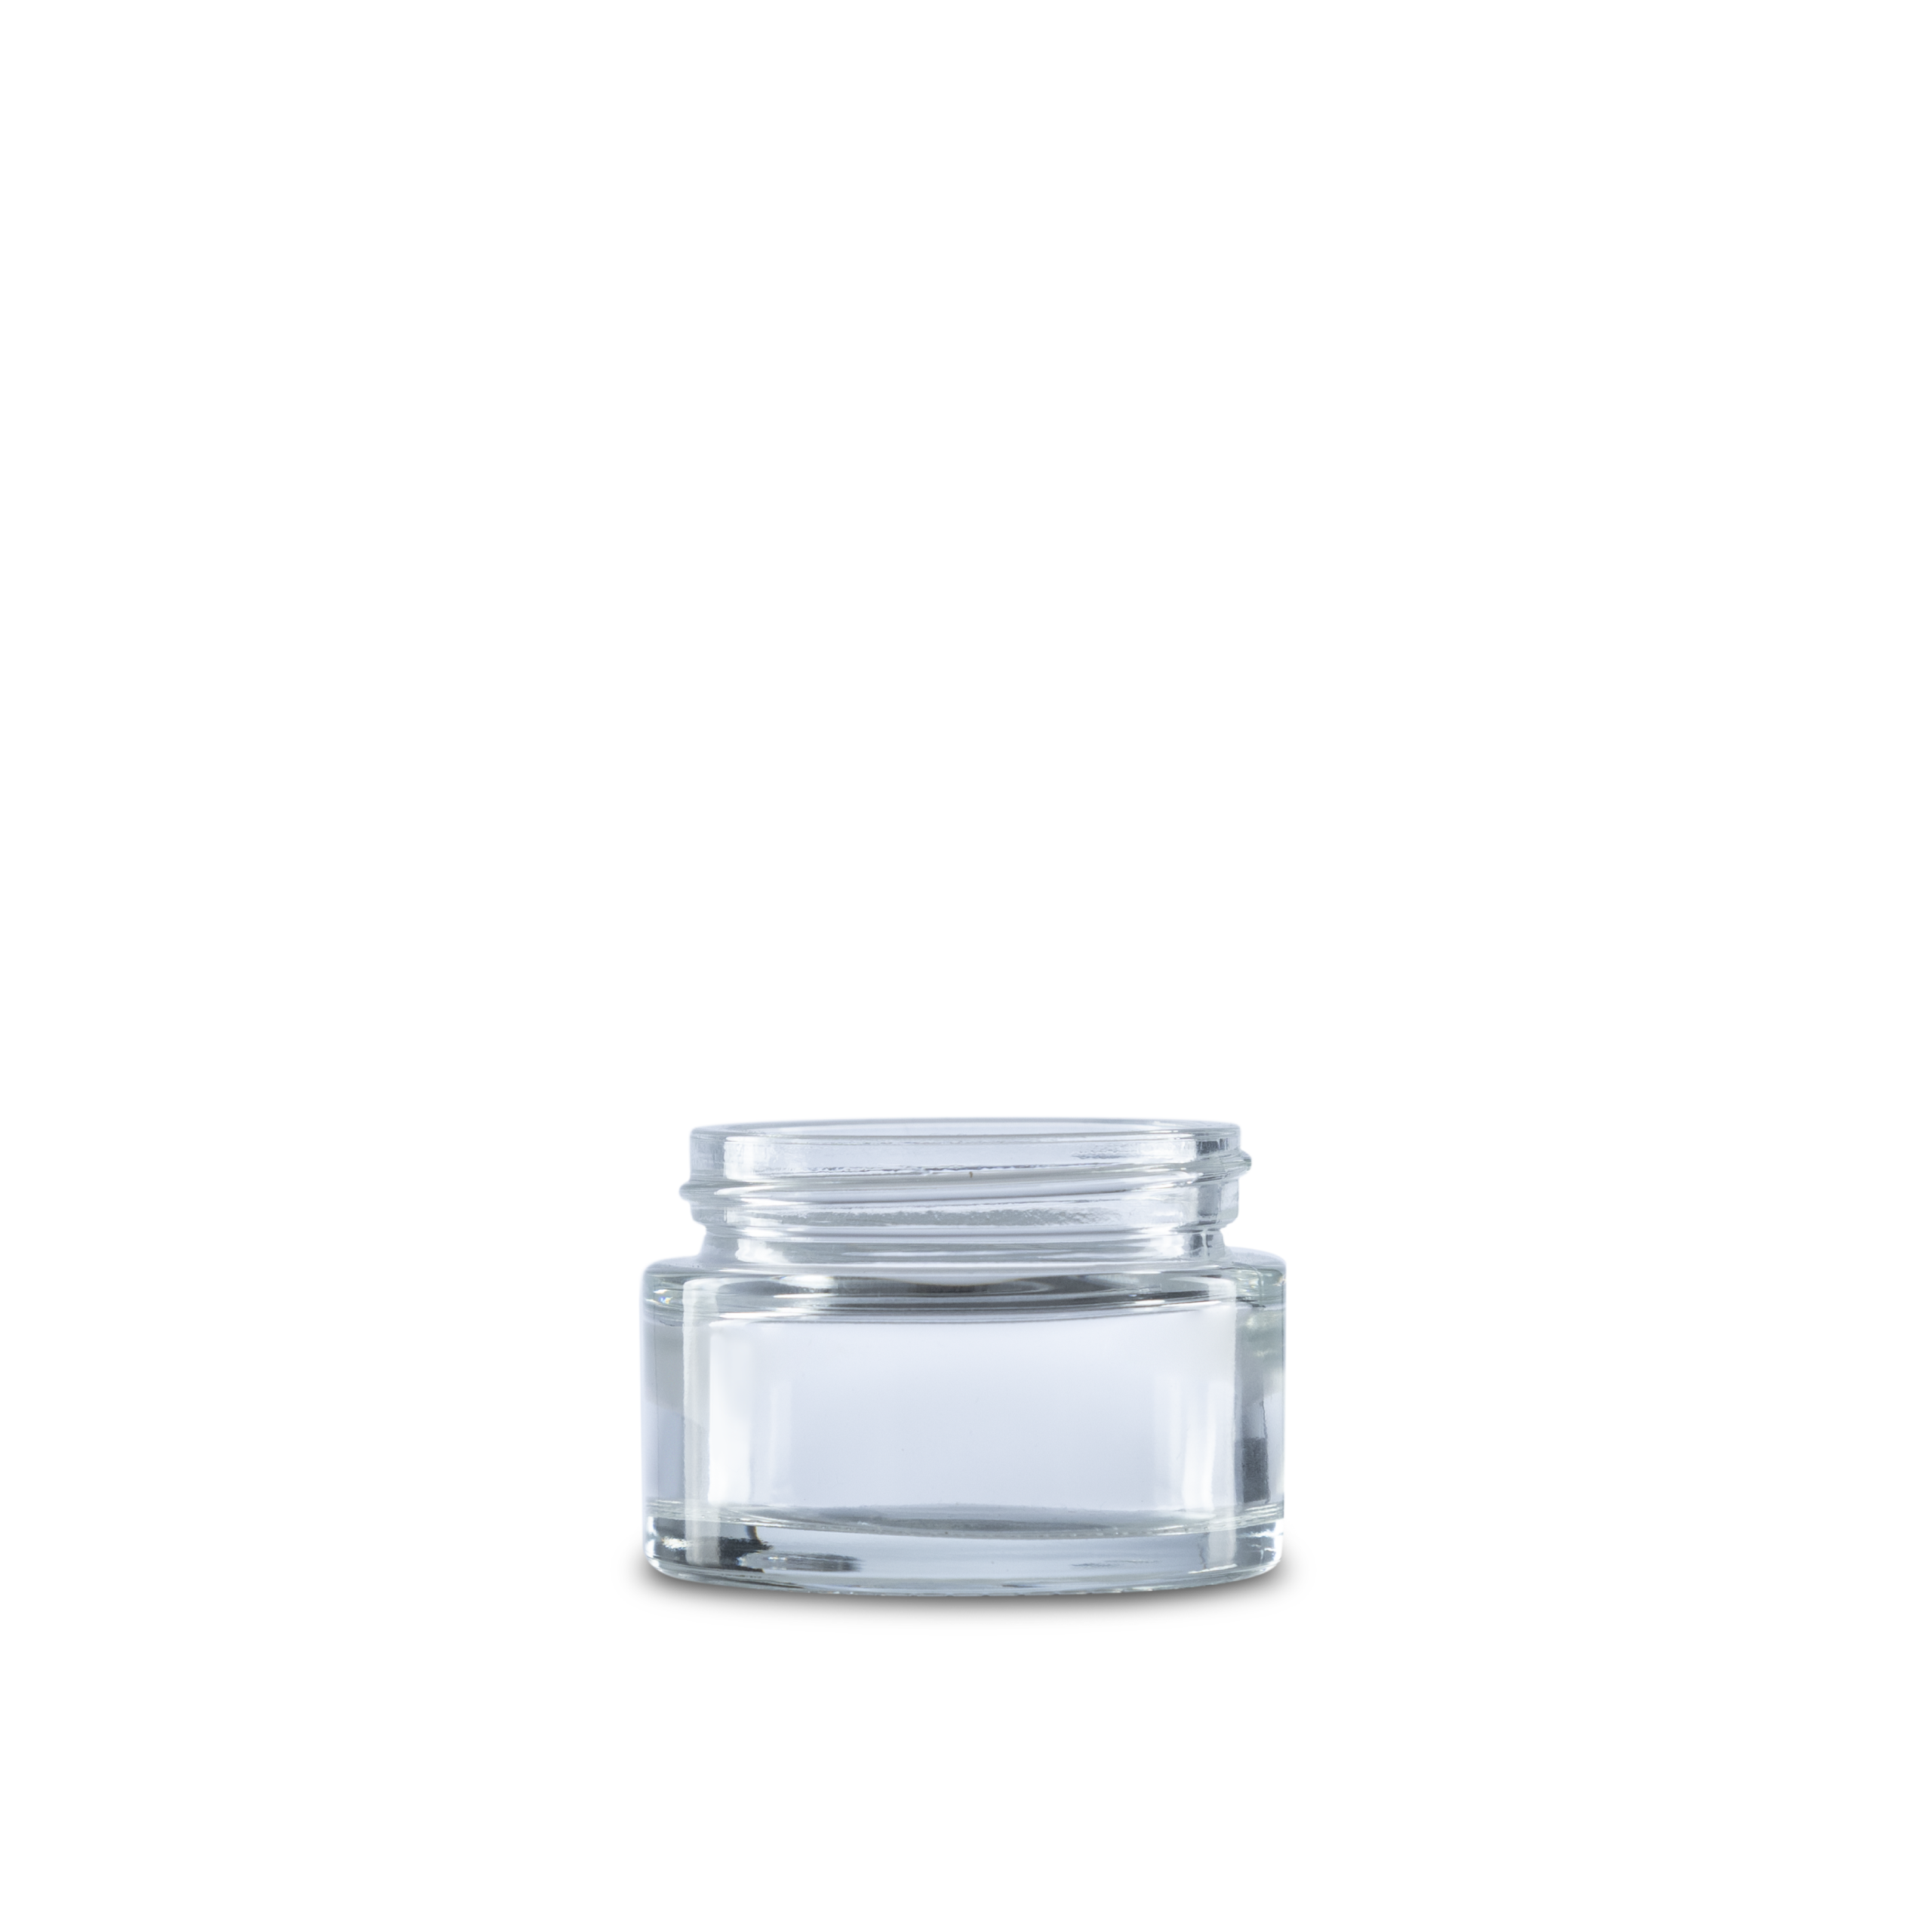 1 oz clear glass jars make for a sleek, modern and aesthetically pleasing design on any retail shelf. 